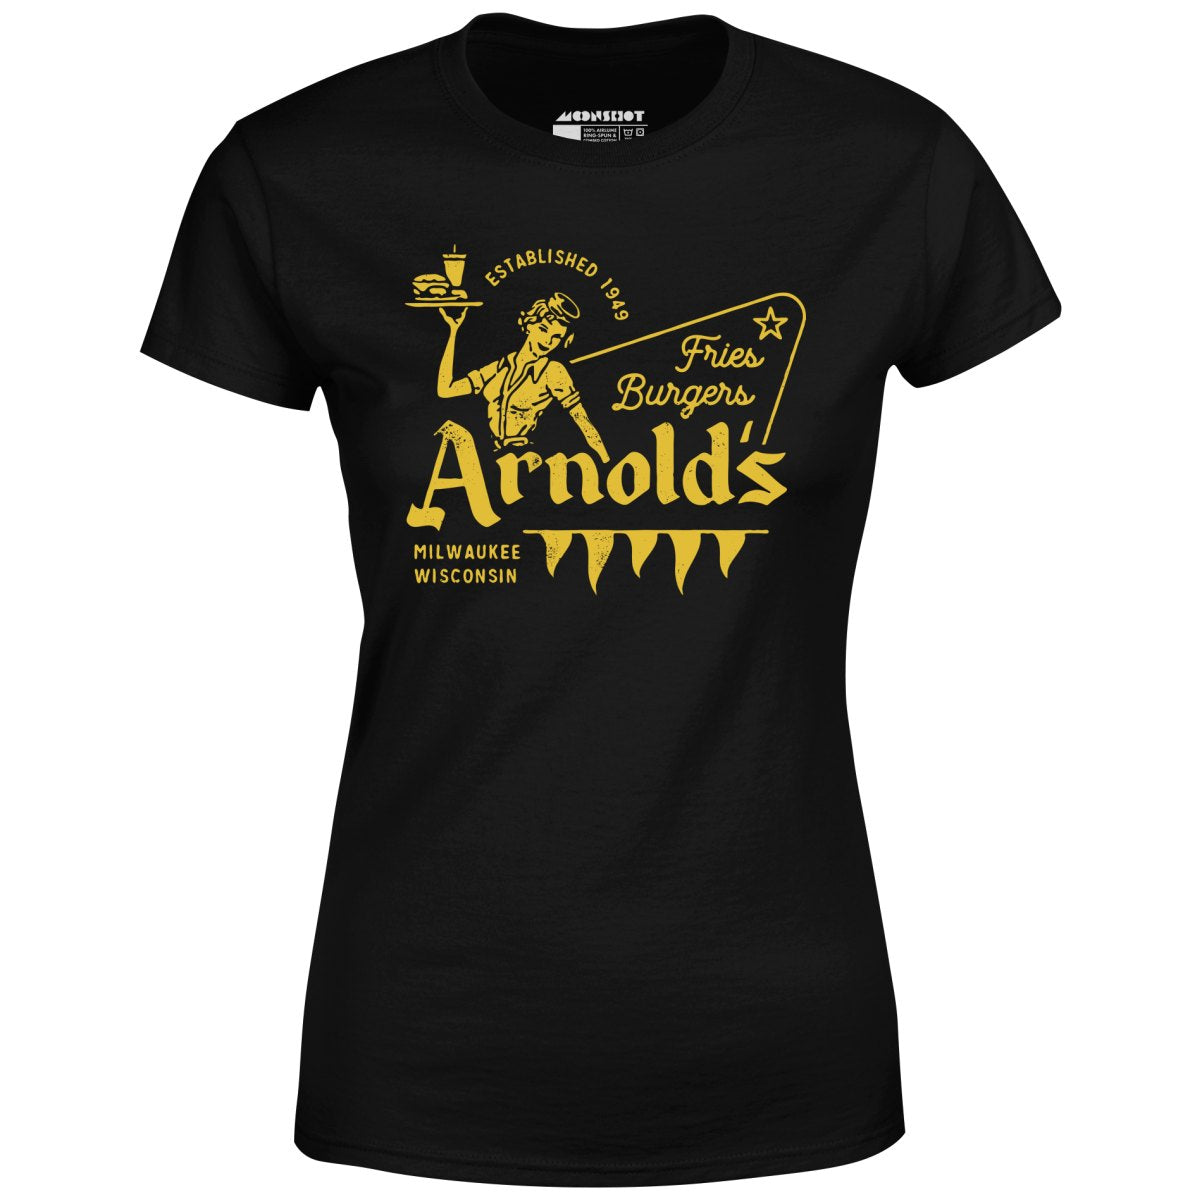 Arnold's Drive-In Happy Days - Women's T-Shirt